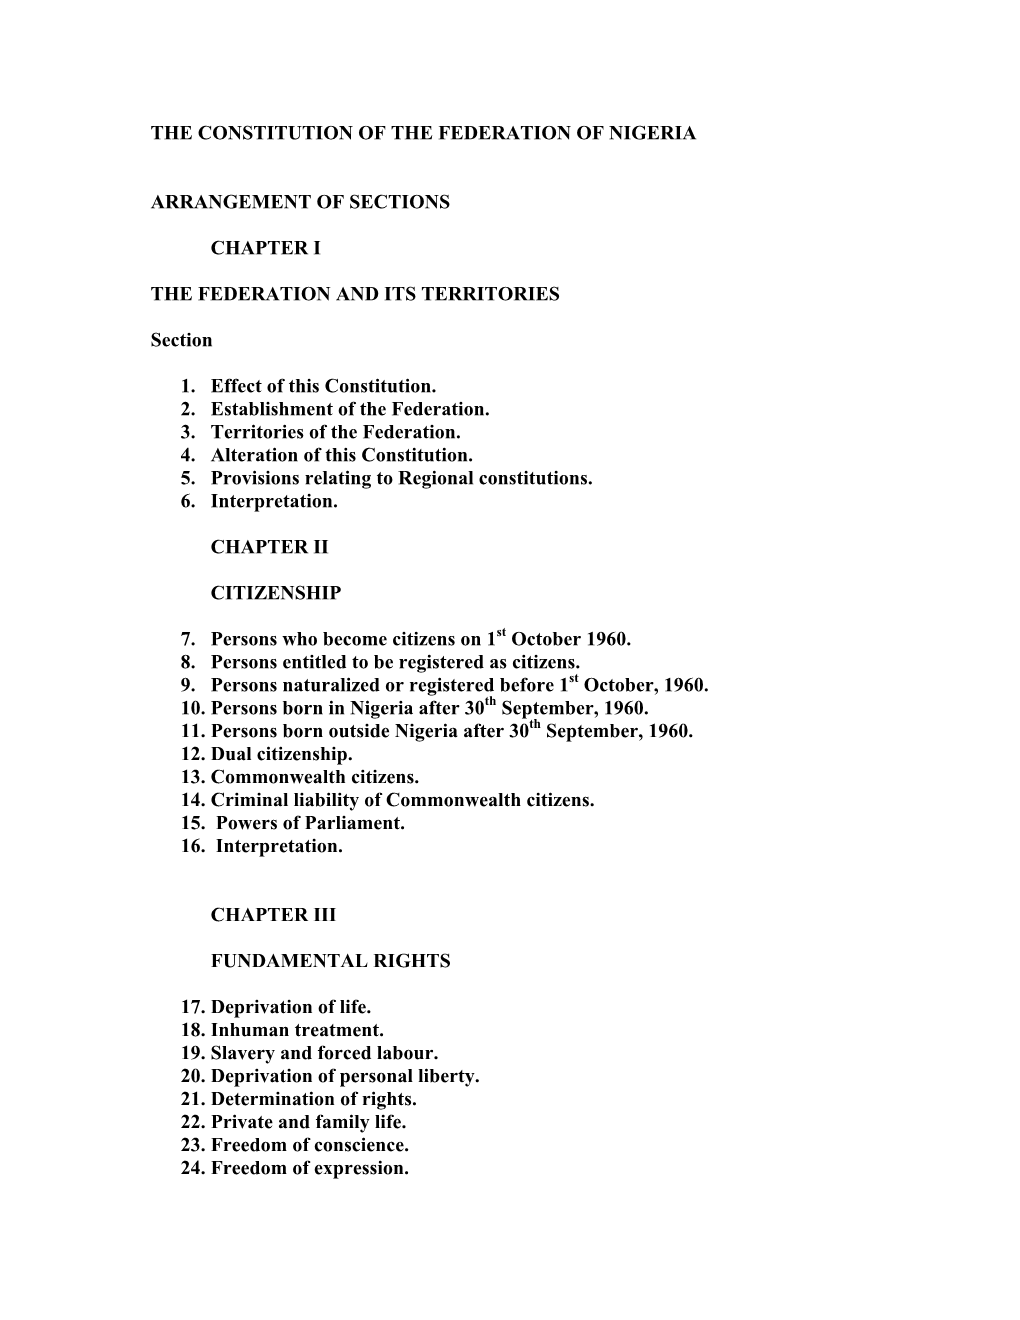 The Constitution of the Federation of Nigeria (1960)